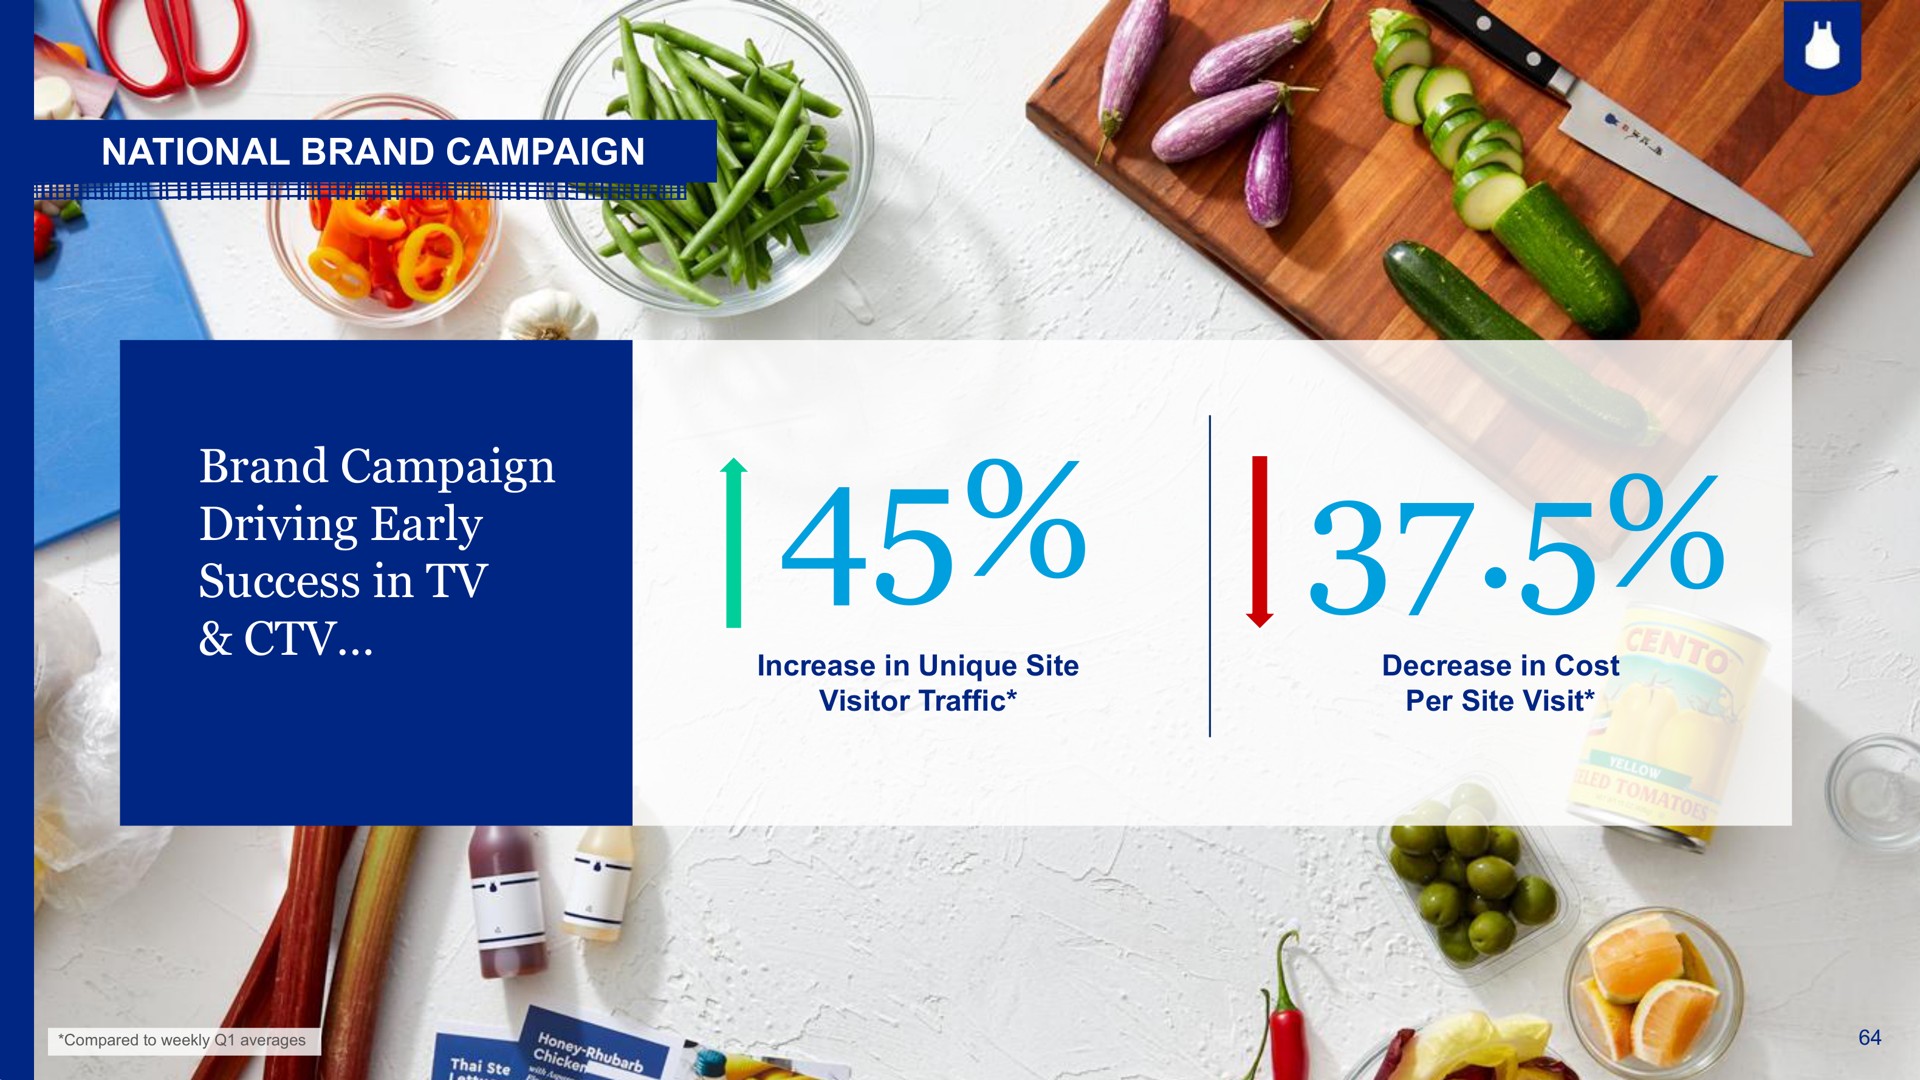 national brand campaign brand campaign driving early success in downy | Blue Apron